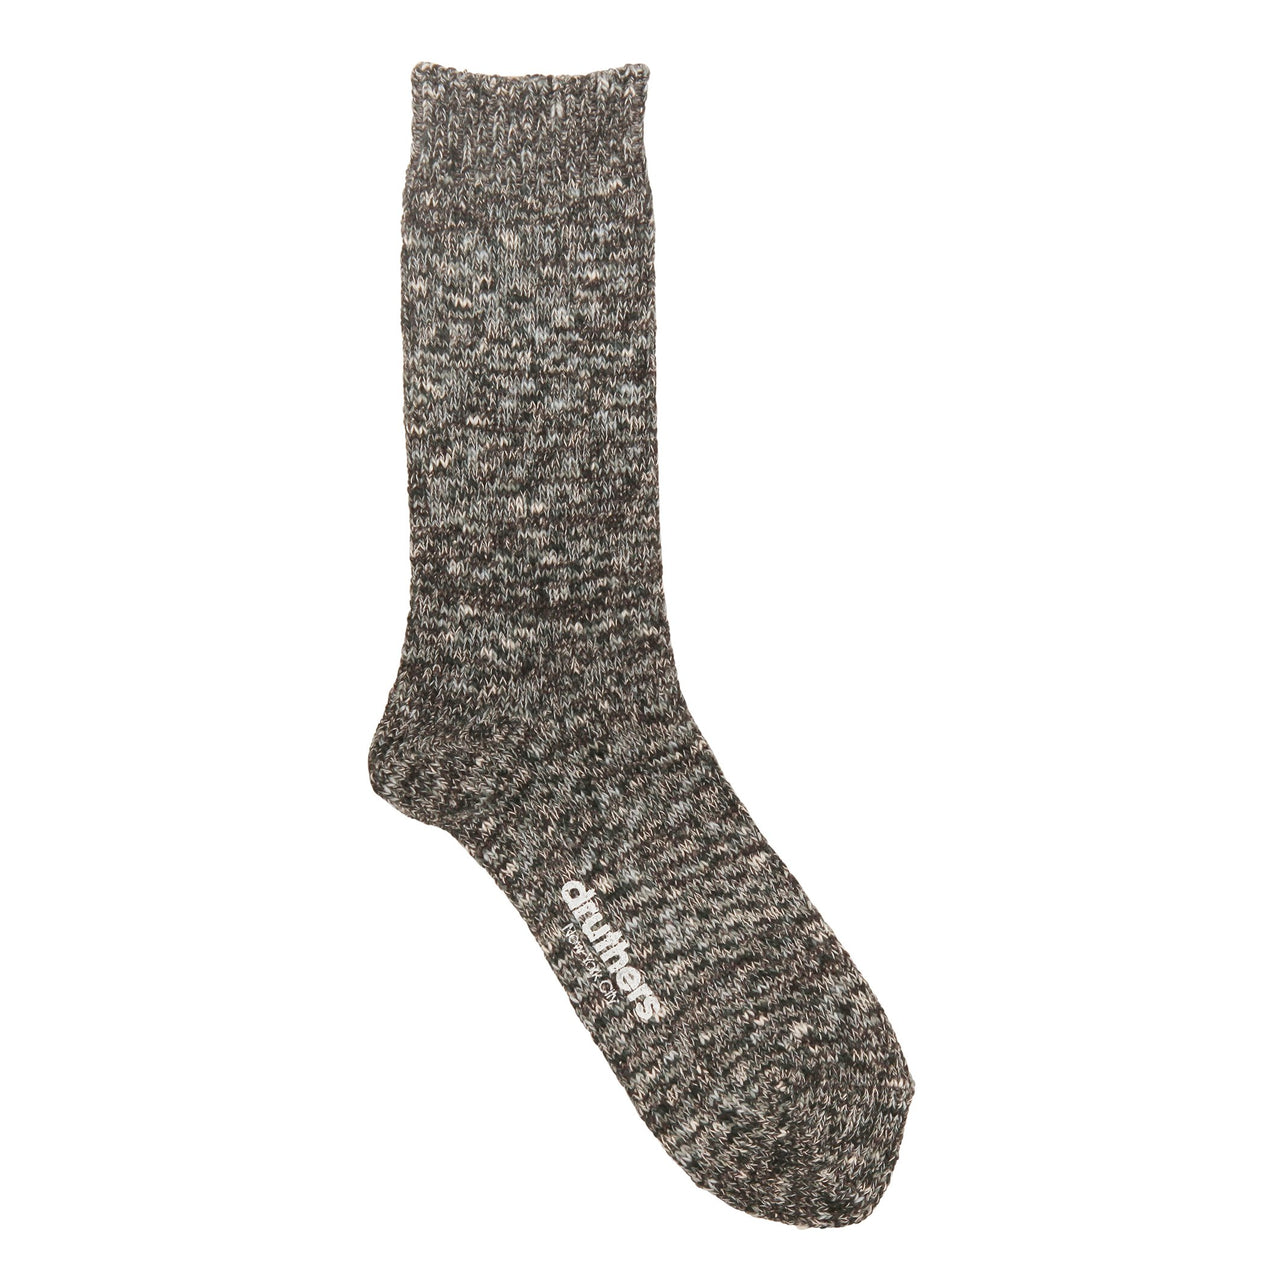 DRUTHERS RECYCLED COTTON MÉLANGE CREW SOCK - 5 COLORS